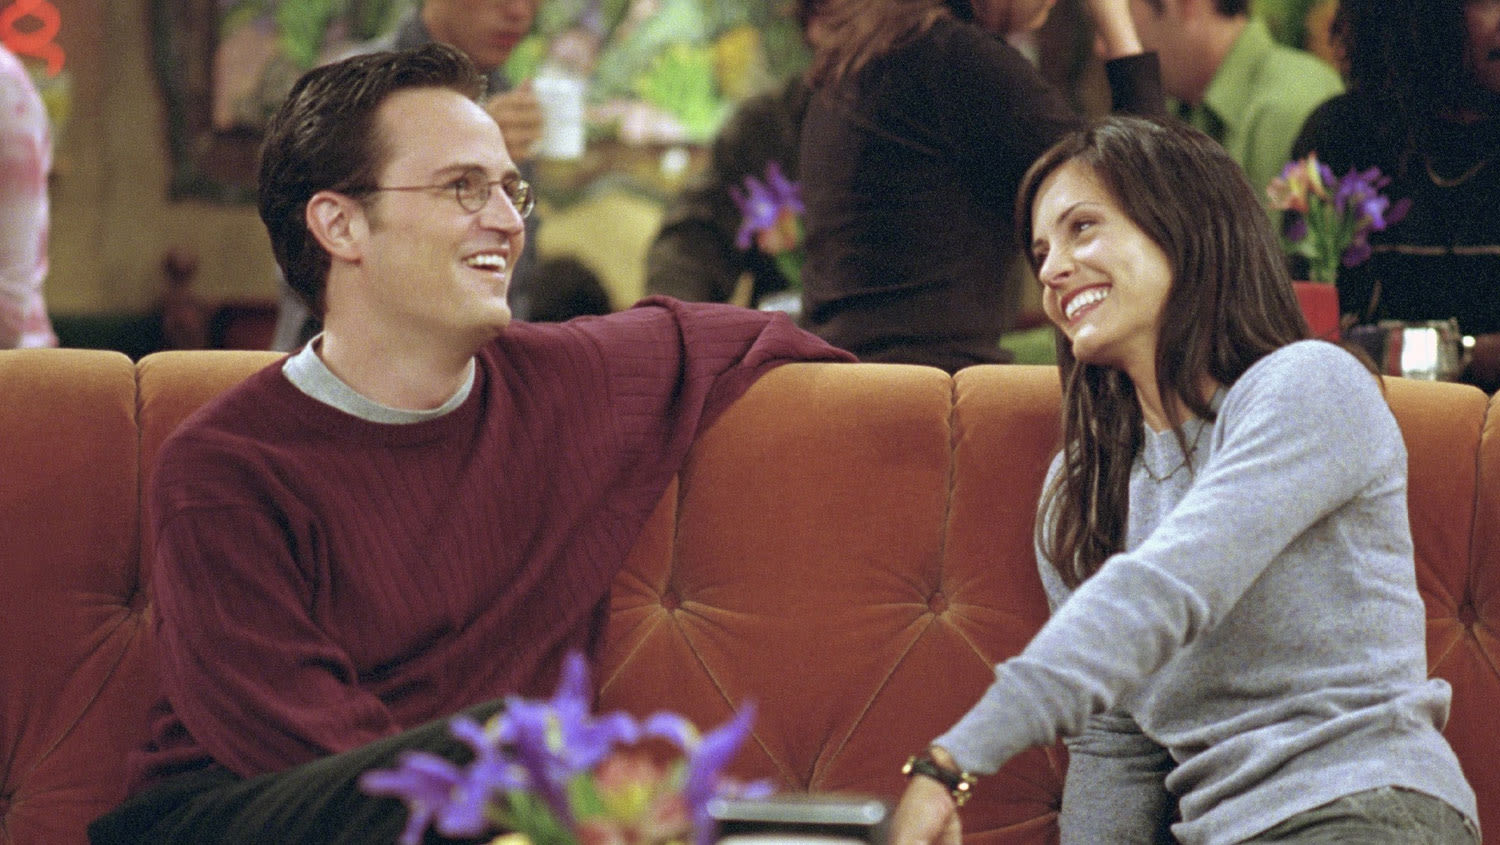 Courteney Cox Says She Still Feels Matthew Perry’s Presence: “He Visits Me A Lot”